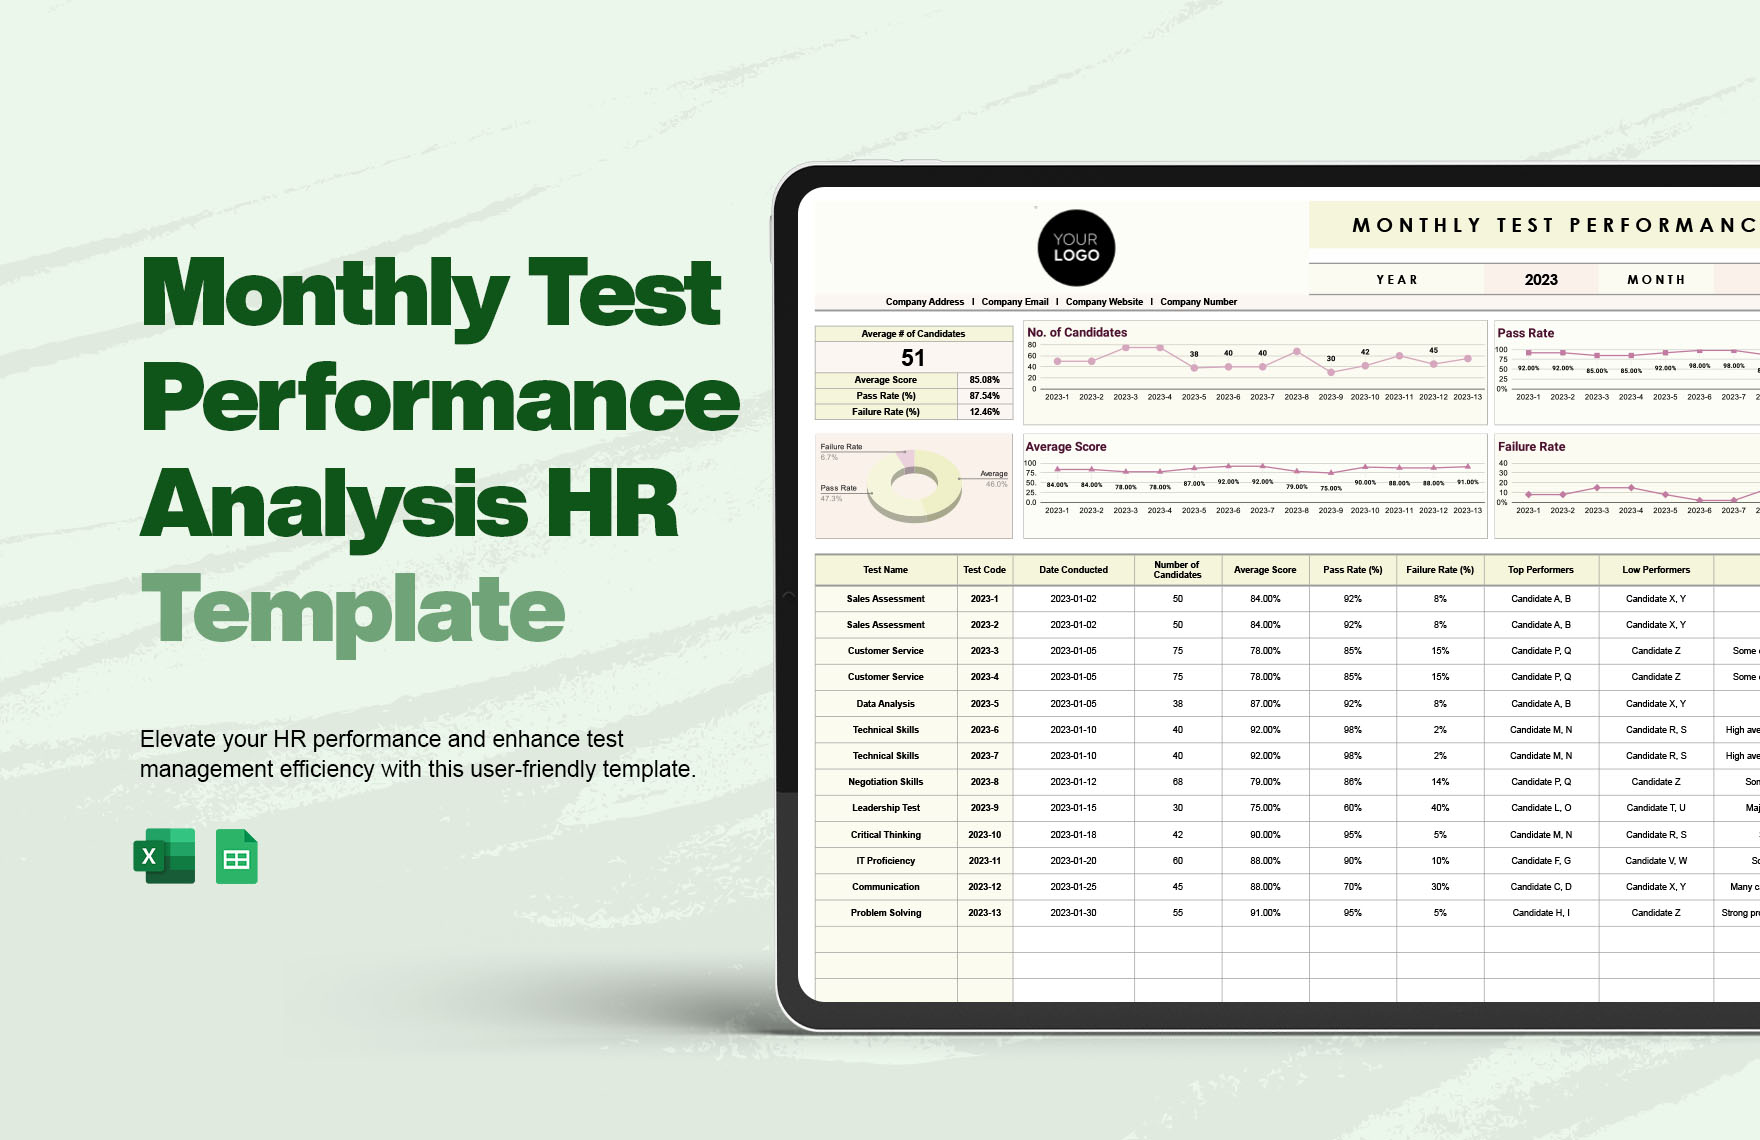 Monthly Test Performance Analysis HR Template